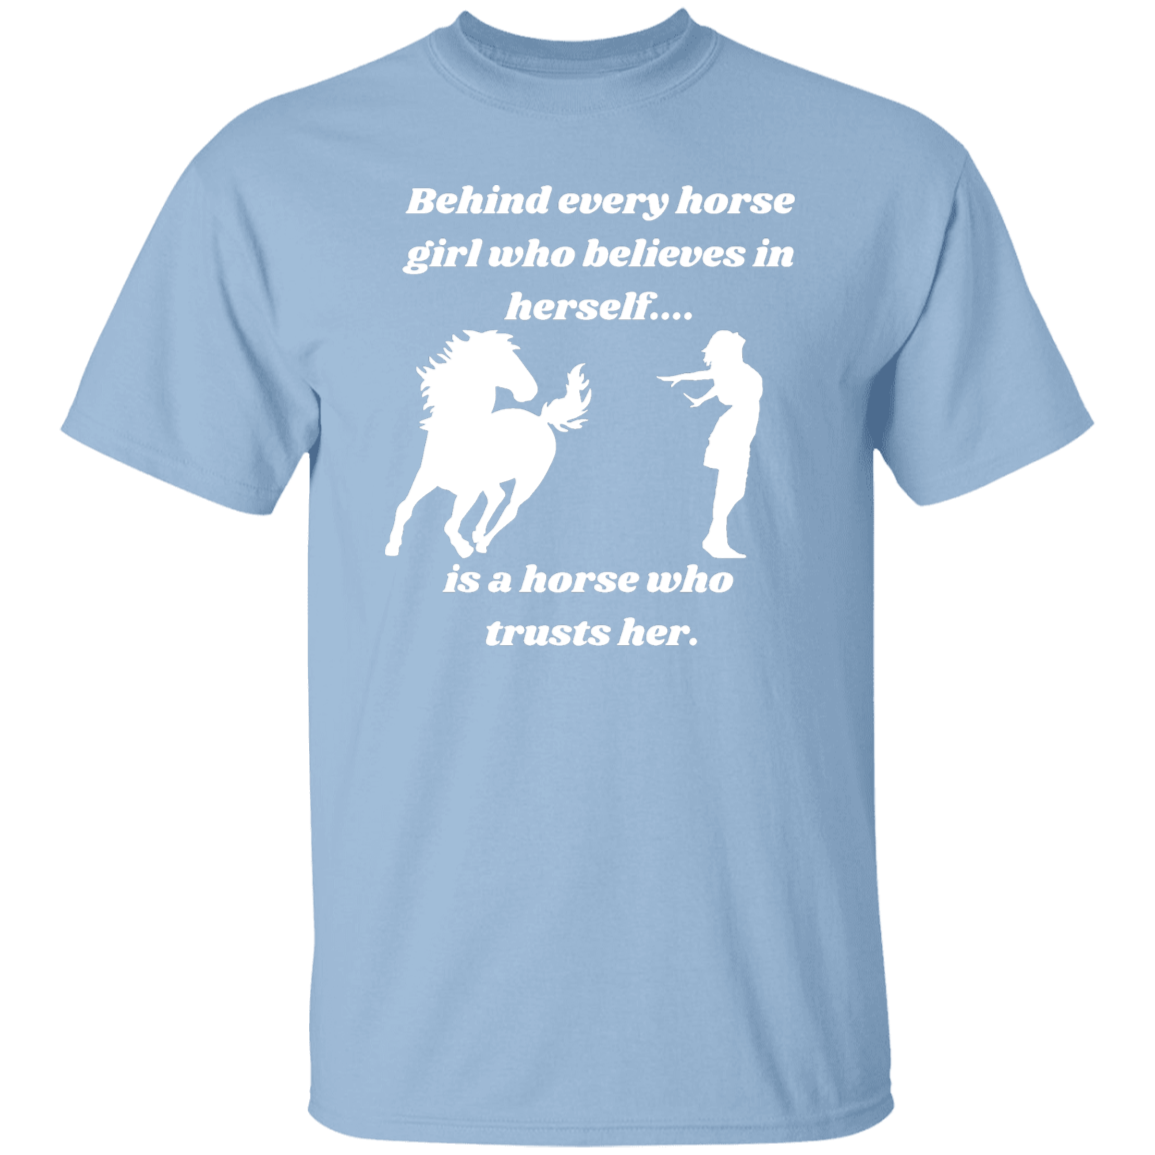 Behind Every Horse Girl T-Shirt Gift Message - MyAllOutHorses